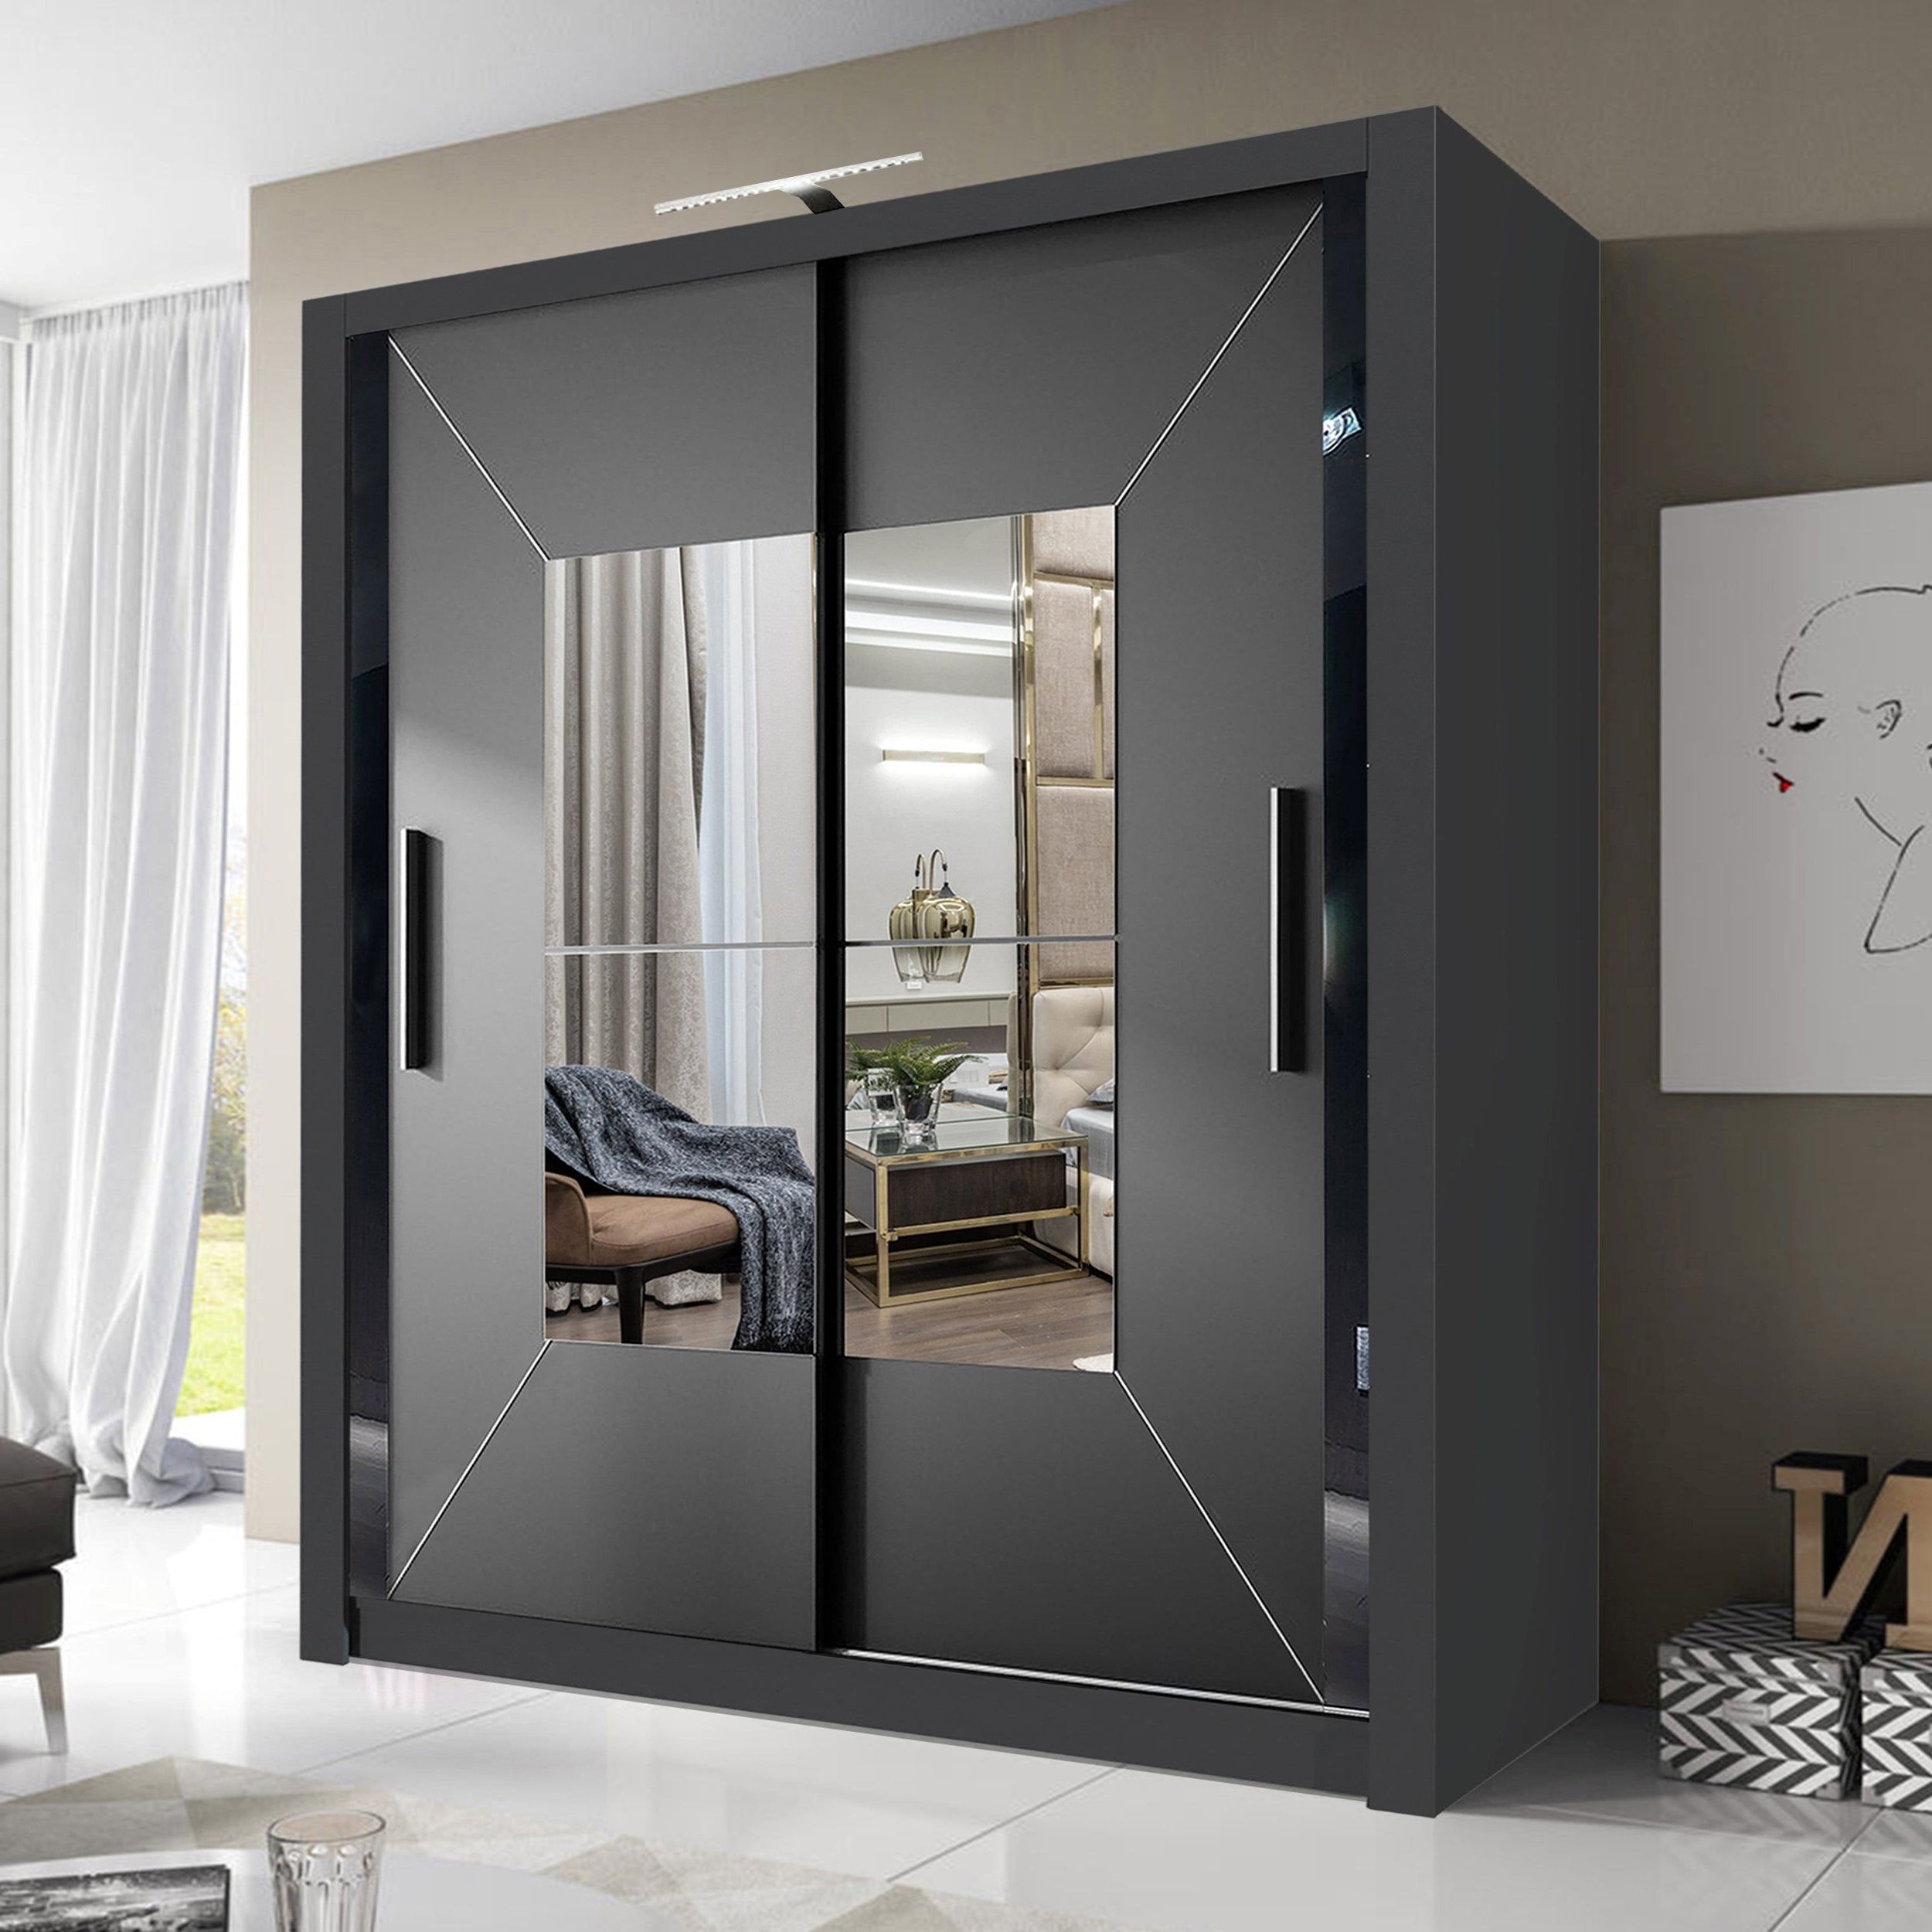 Blisswood Modern Sliding Mirrored Wardrobe, 203cm | Wardrobe Interior  Design, Wardrobe Design Bedroom, Sliding Door Wardrobe Designs Within Black Wardrobes With Mirror (View 8 of 20)